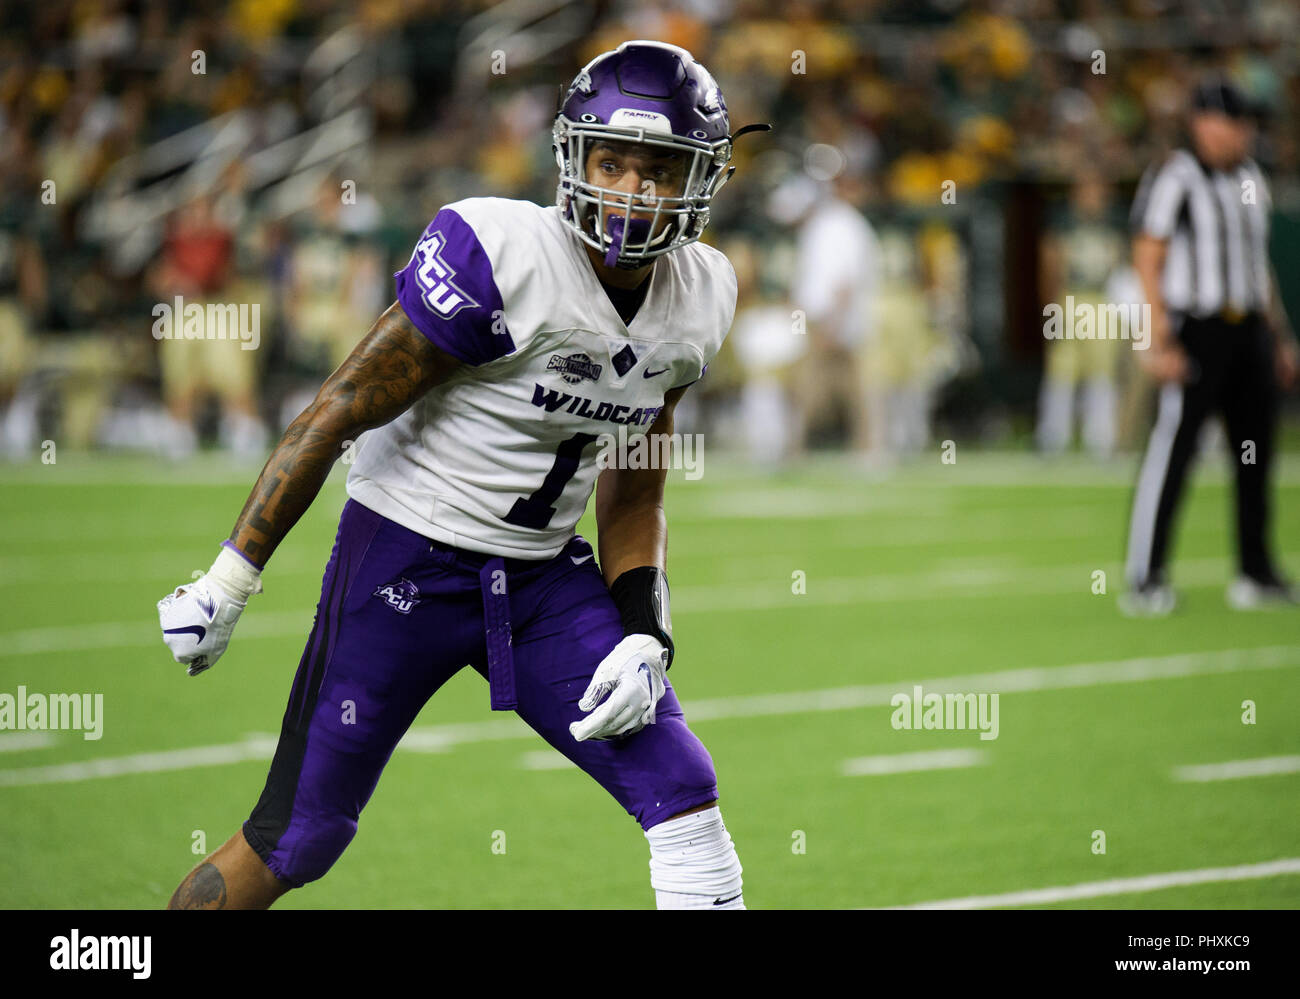 Waco, Texas, USA. 1st Sep, 2018. Abilene Christian Wildcats wide receiver D.J. Fuller (1) lines up during the 1st half of the NCAA Football game between the Abilene Christian Wildcats and Baylor Bears at McLane Stadium in Waco, Texas. Matthew Lynch/CSM/Alamy Live News Stock Photo